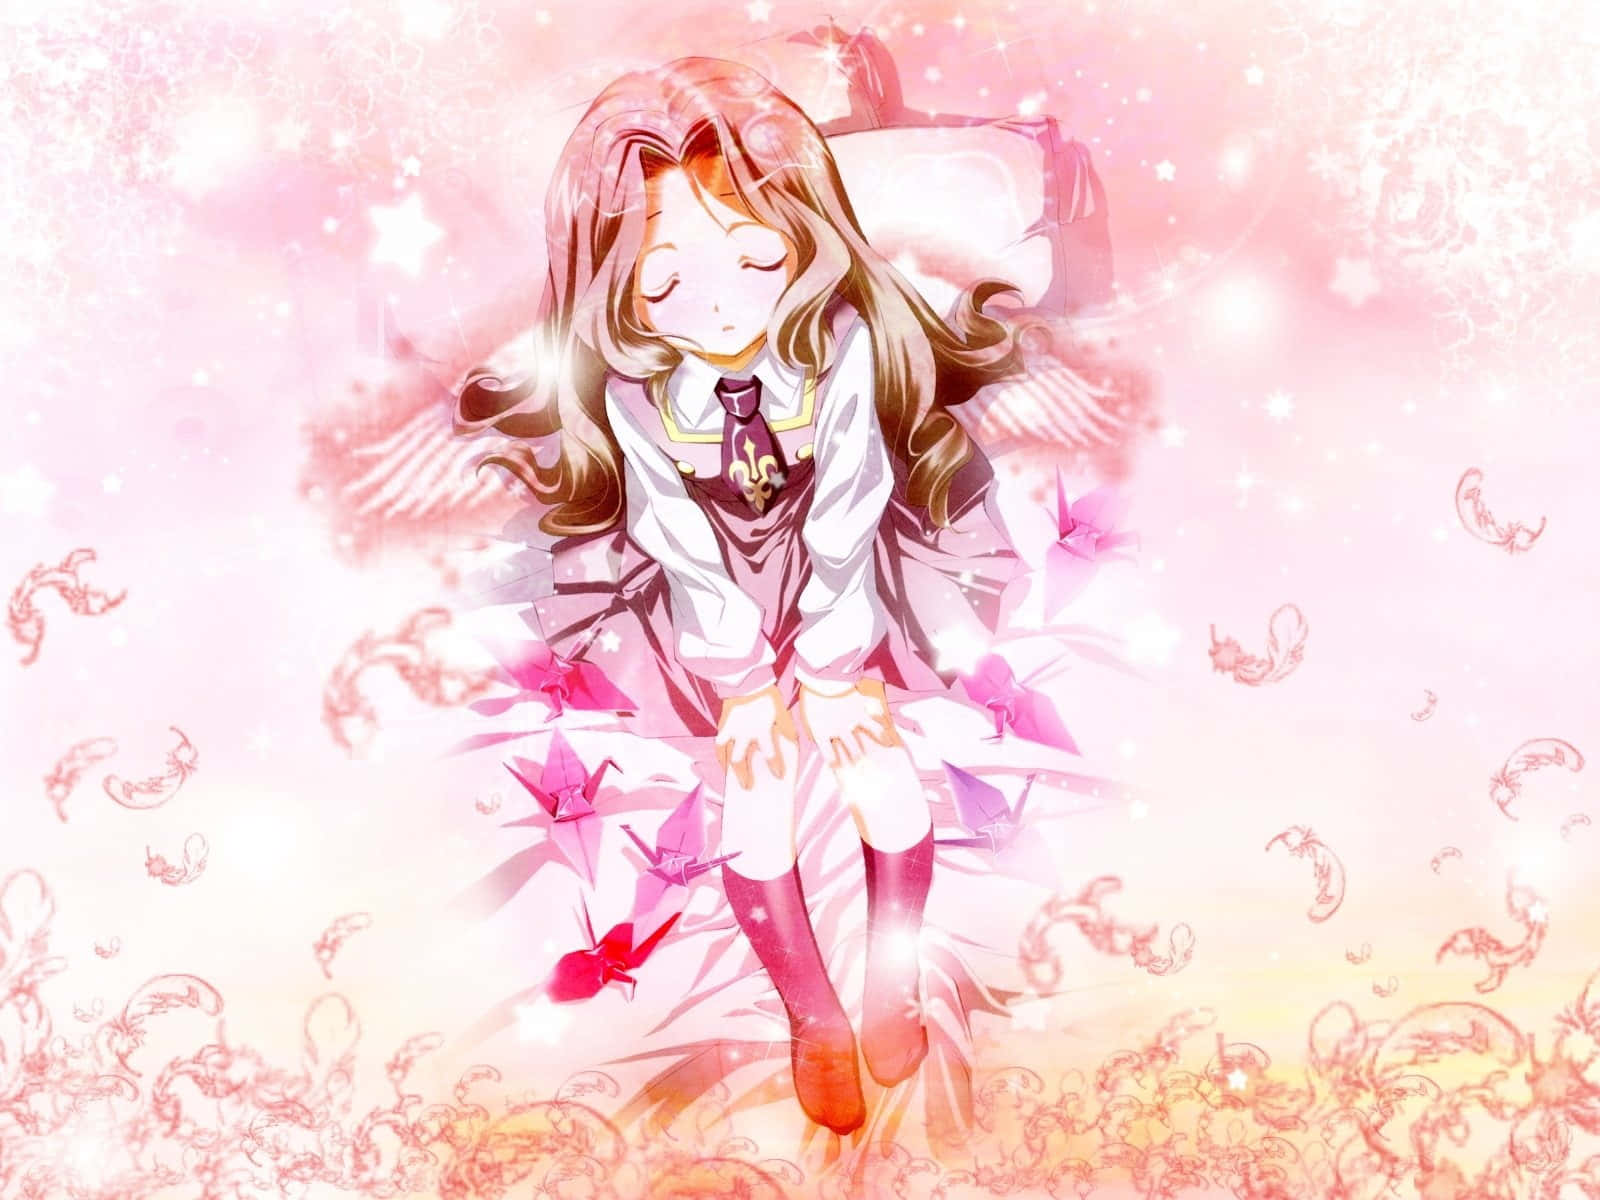 Nunnally Lamperouge in a thoughtful moment Wallpaper